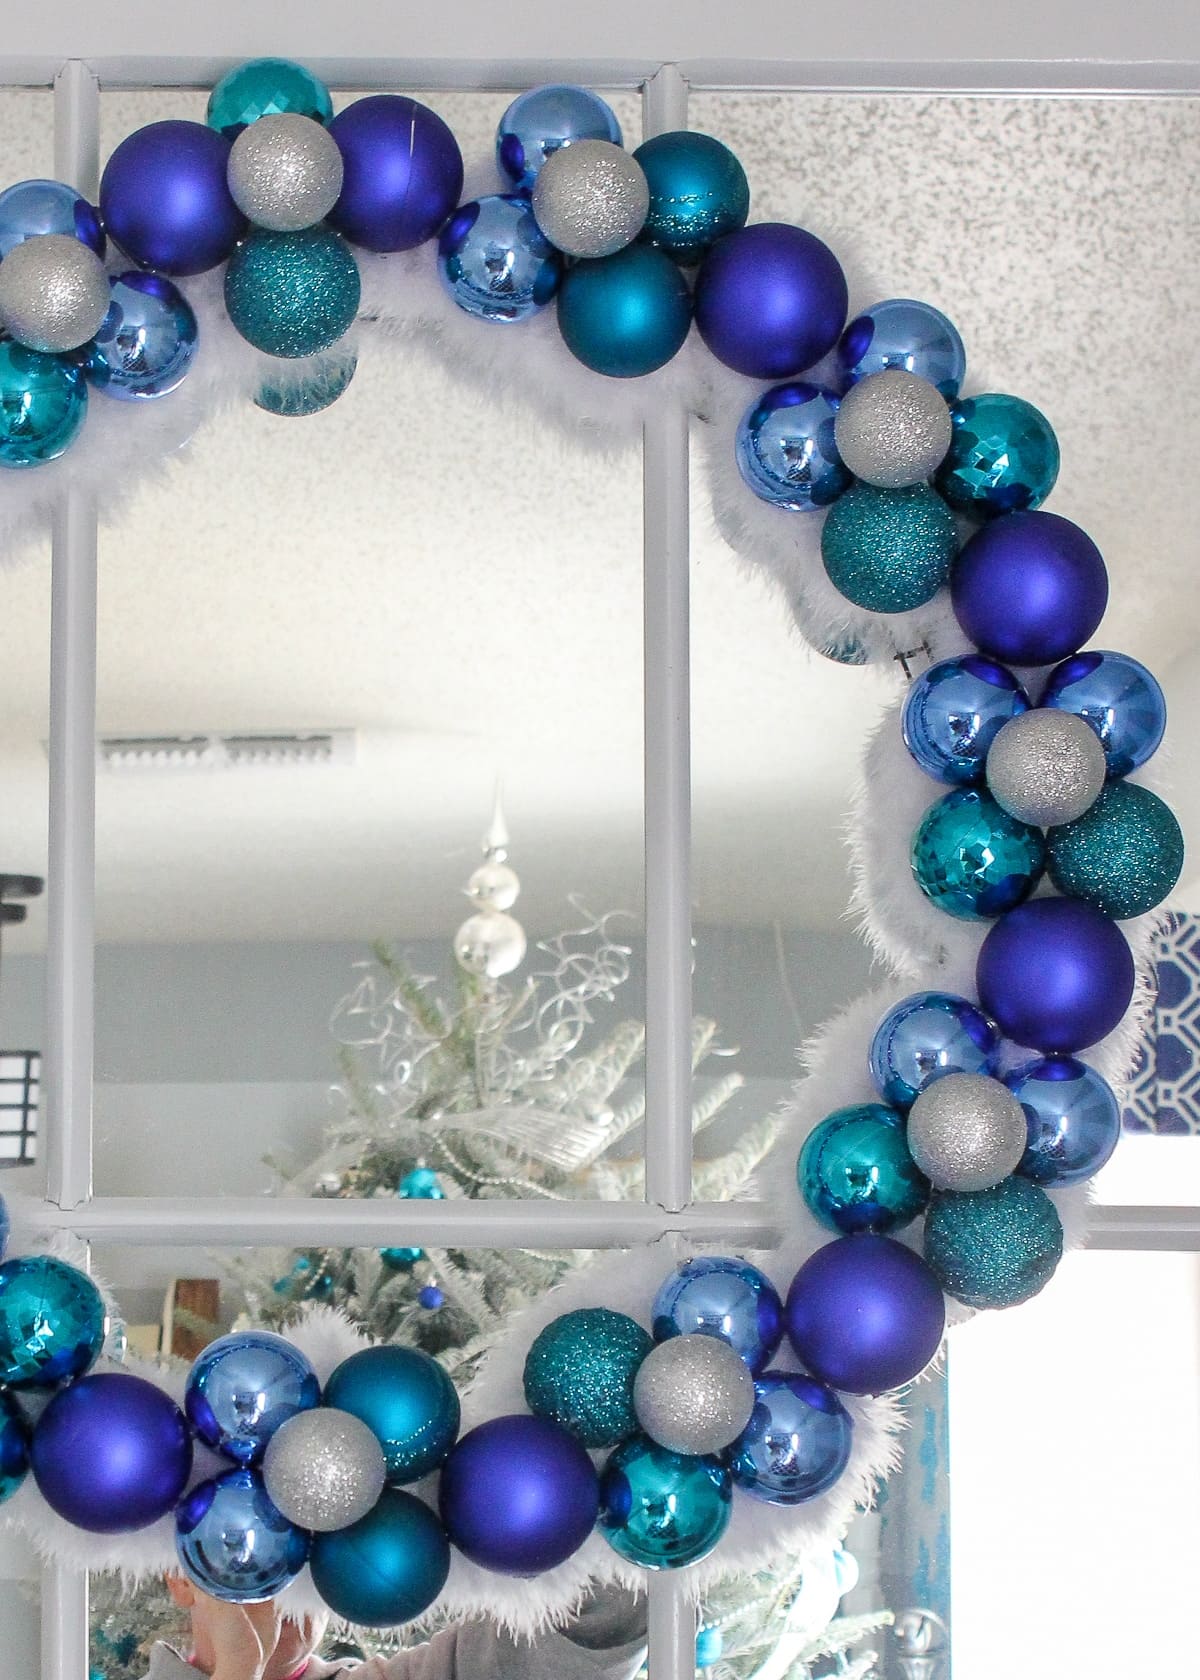 Turquoise, royal blue, and white ornament wreath